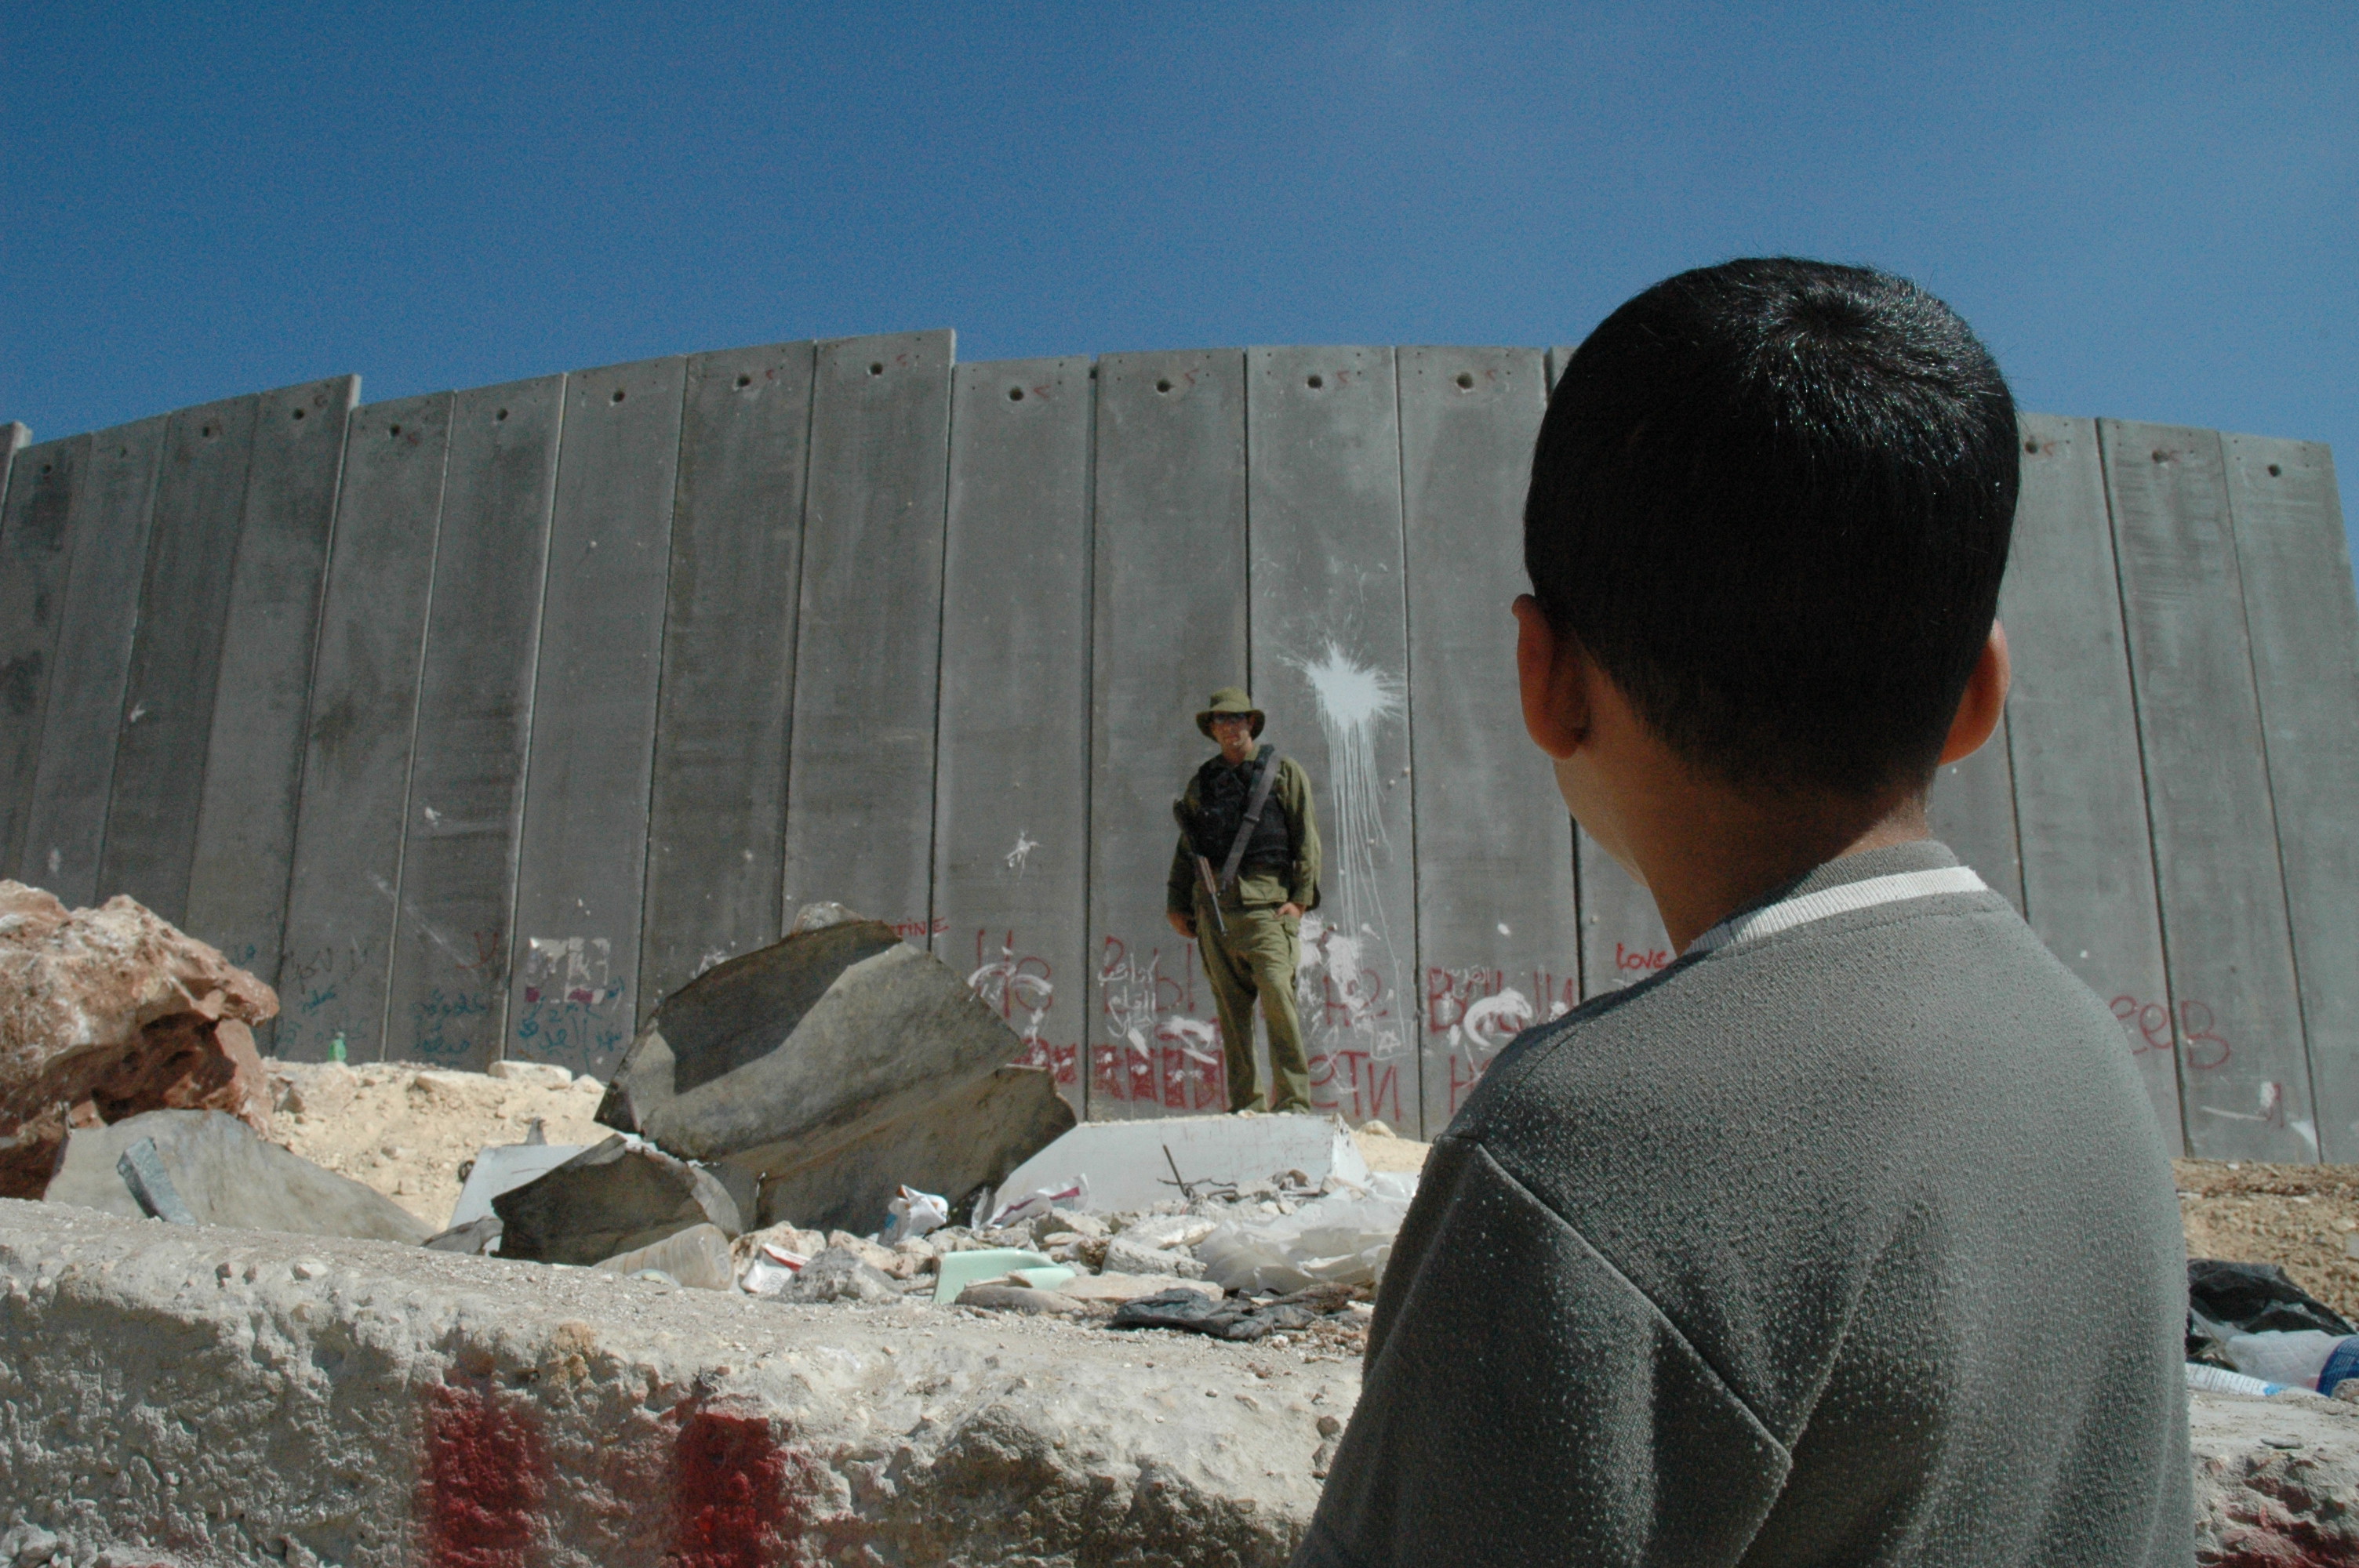 A boy and soldier in front of the West Bank Barrier